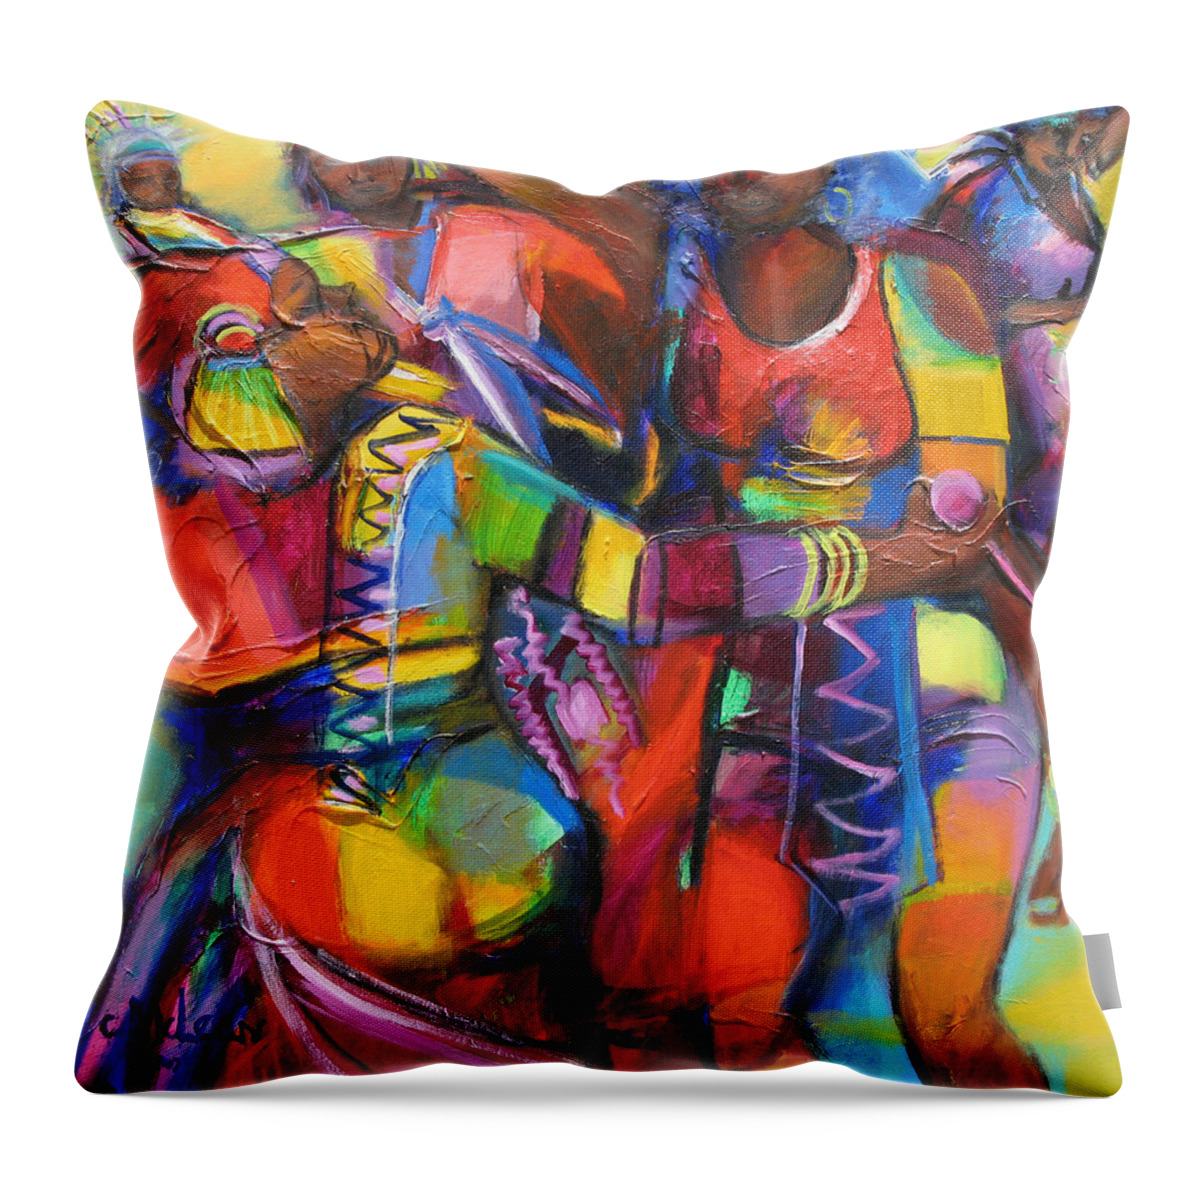 Abstract Throw Pillow featuring the painting Trinidad Carnival by Cynthia McLean